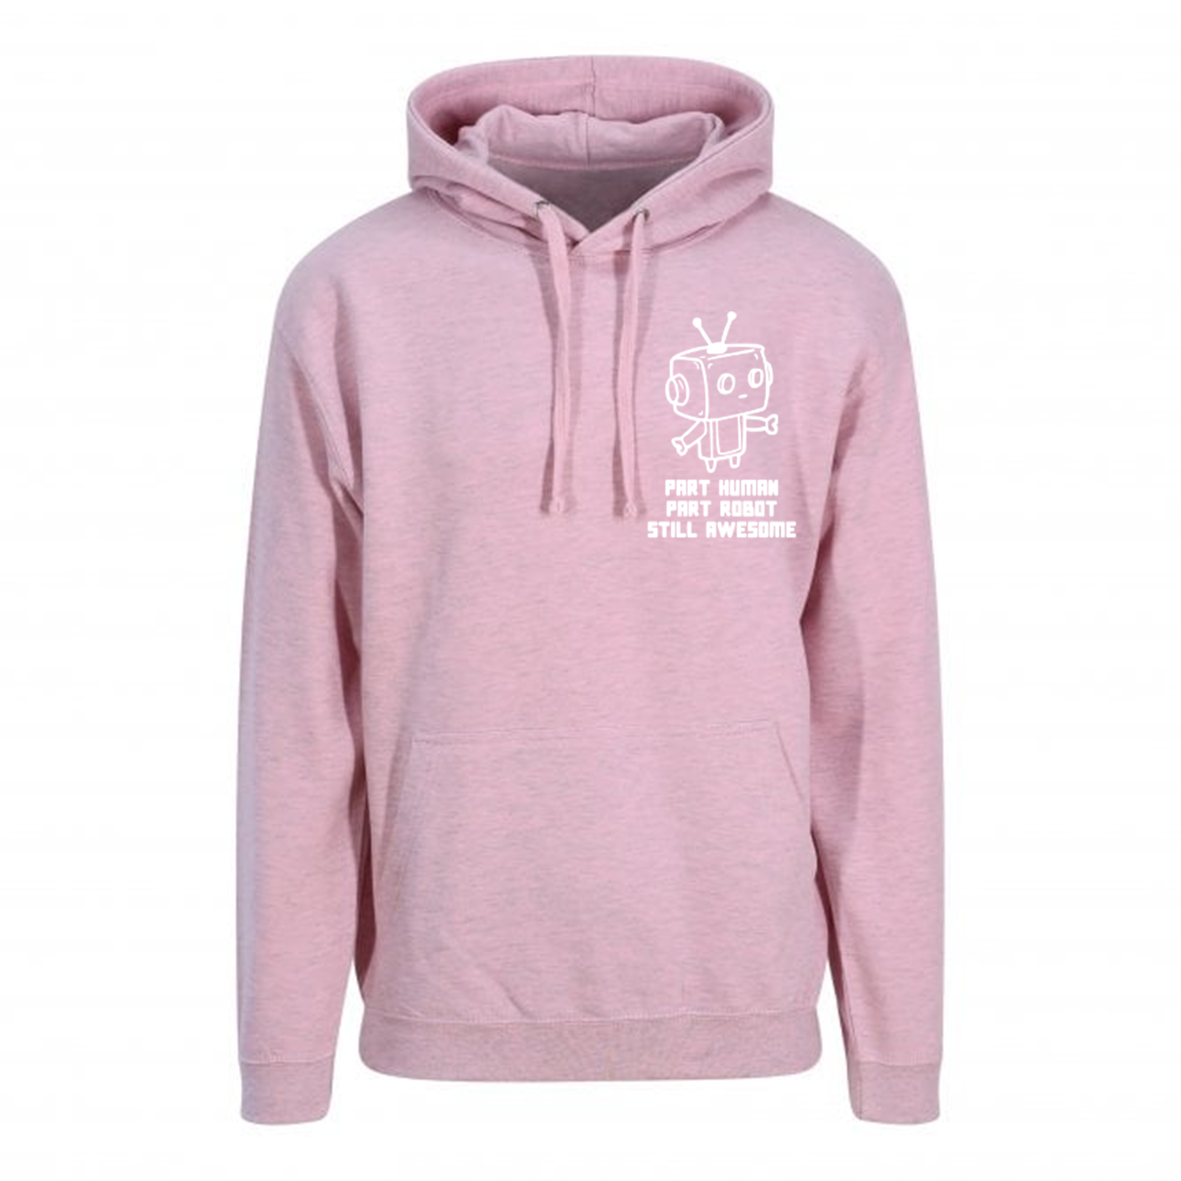 Part Human Part Robot Still Awesome Pastel Hoodie